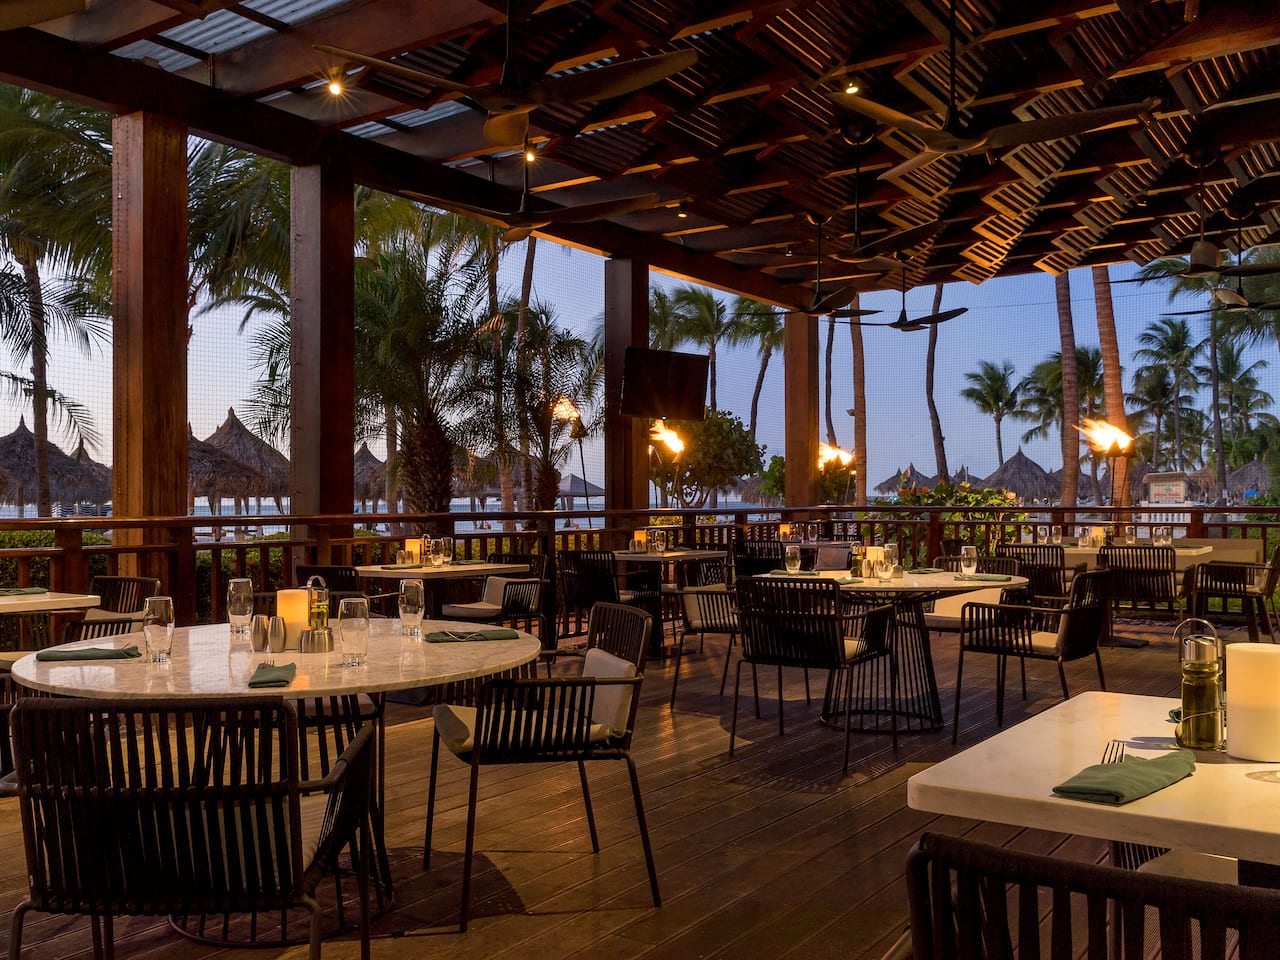 Covered dining area at beachfront restaurant in Aruba